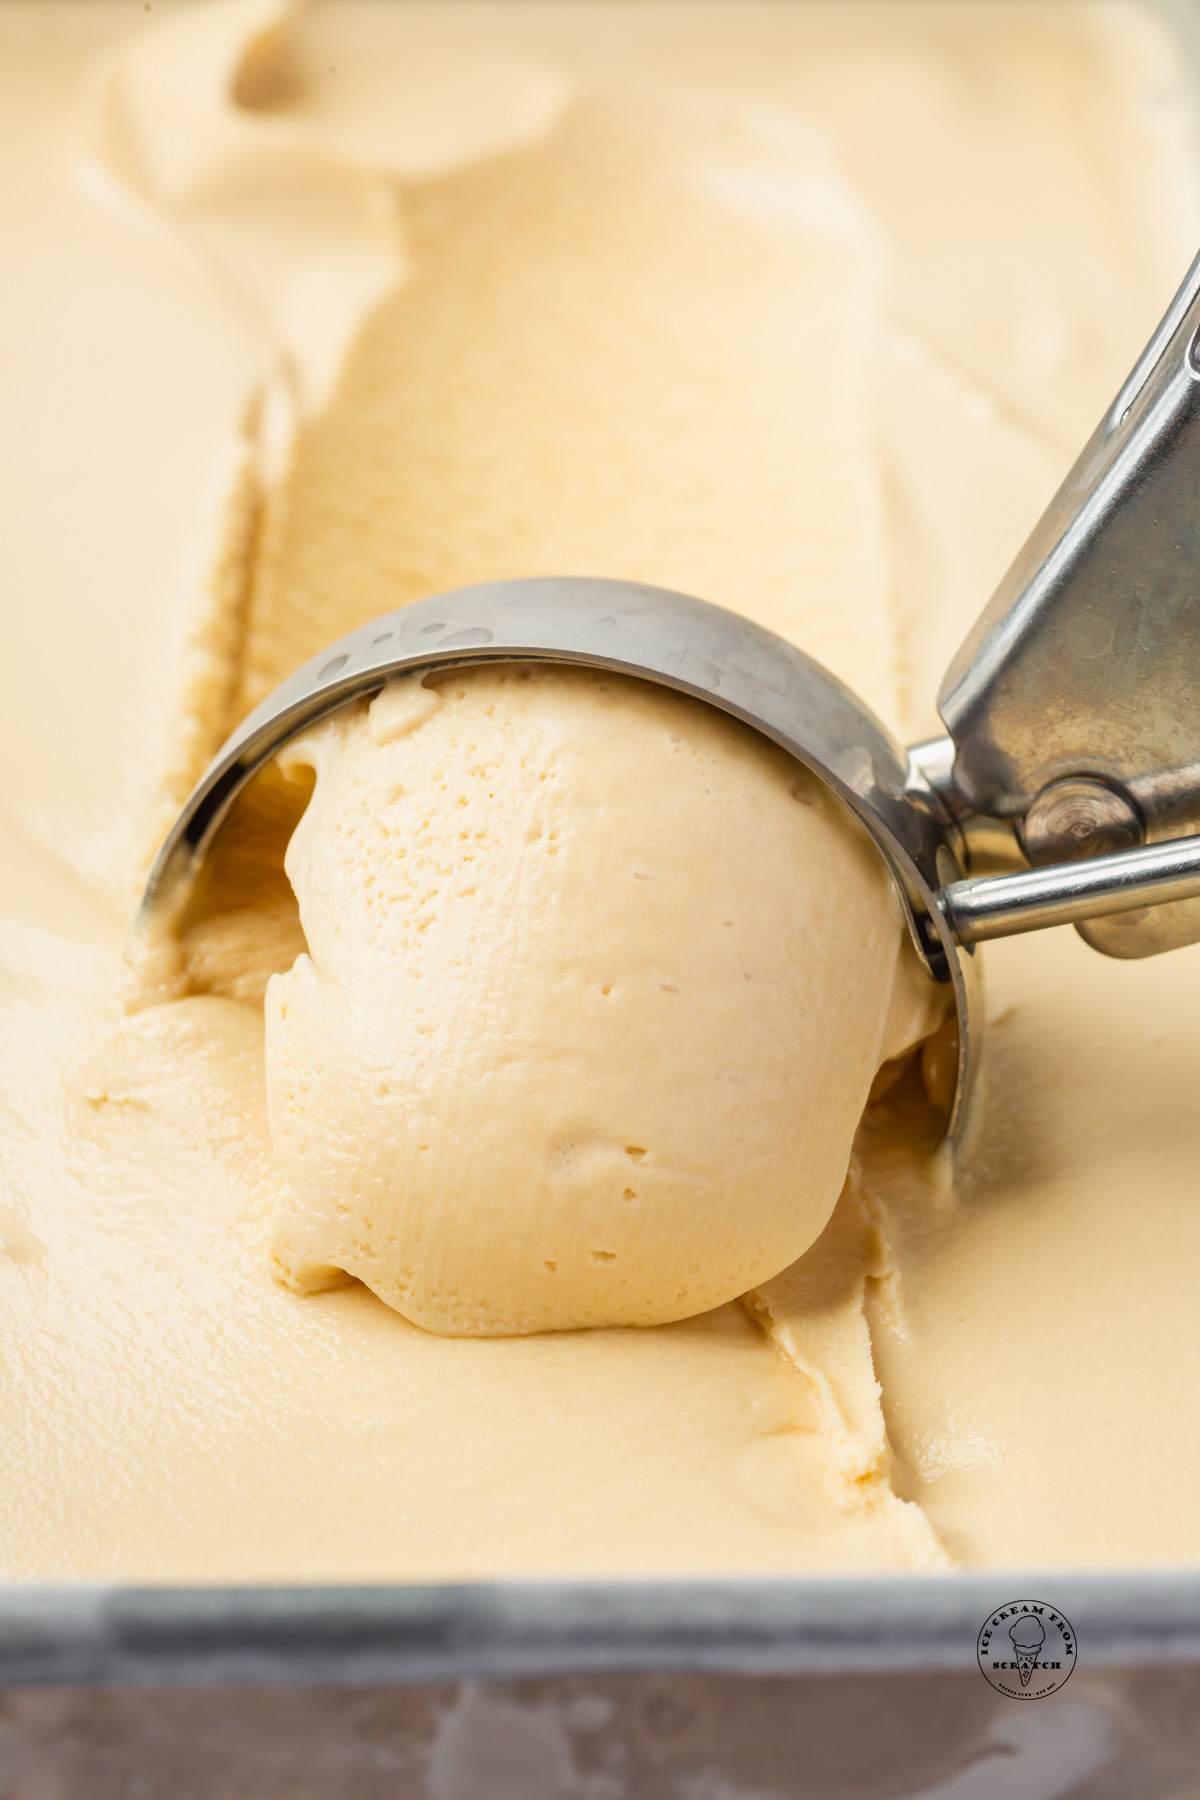 a metal scoop pulling a scoop of homemade creamy caramel ice cream.